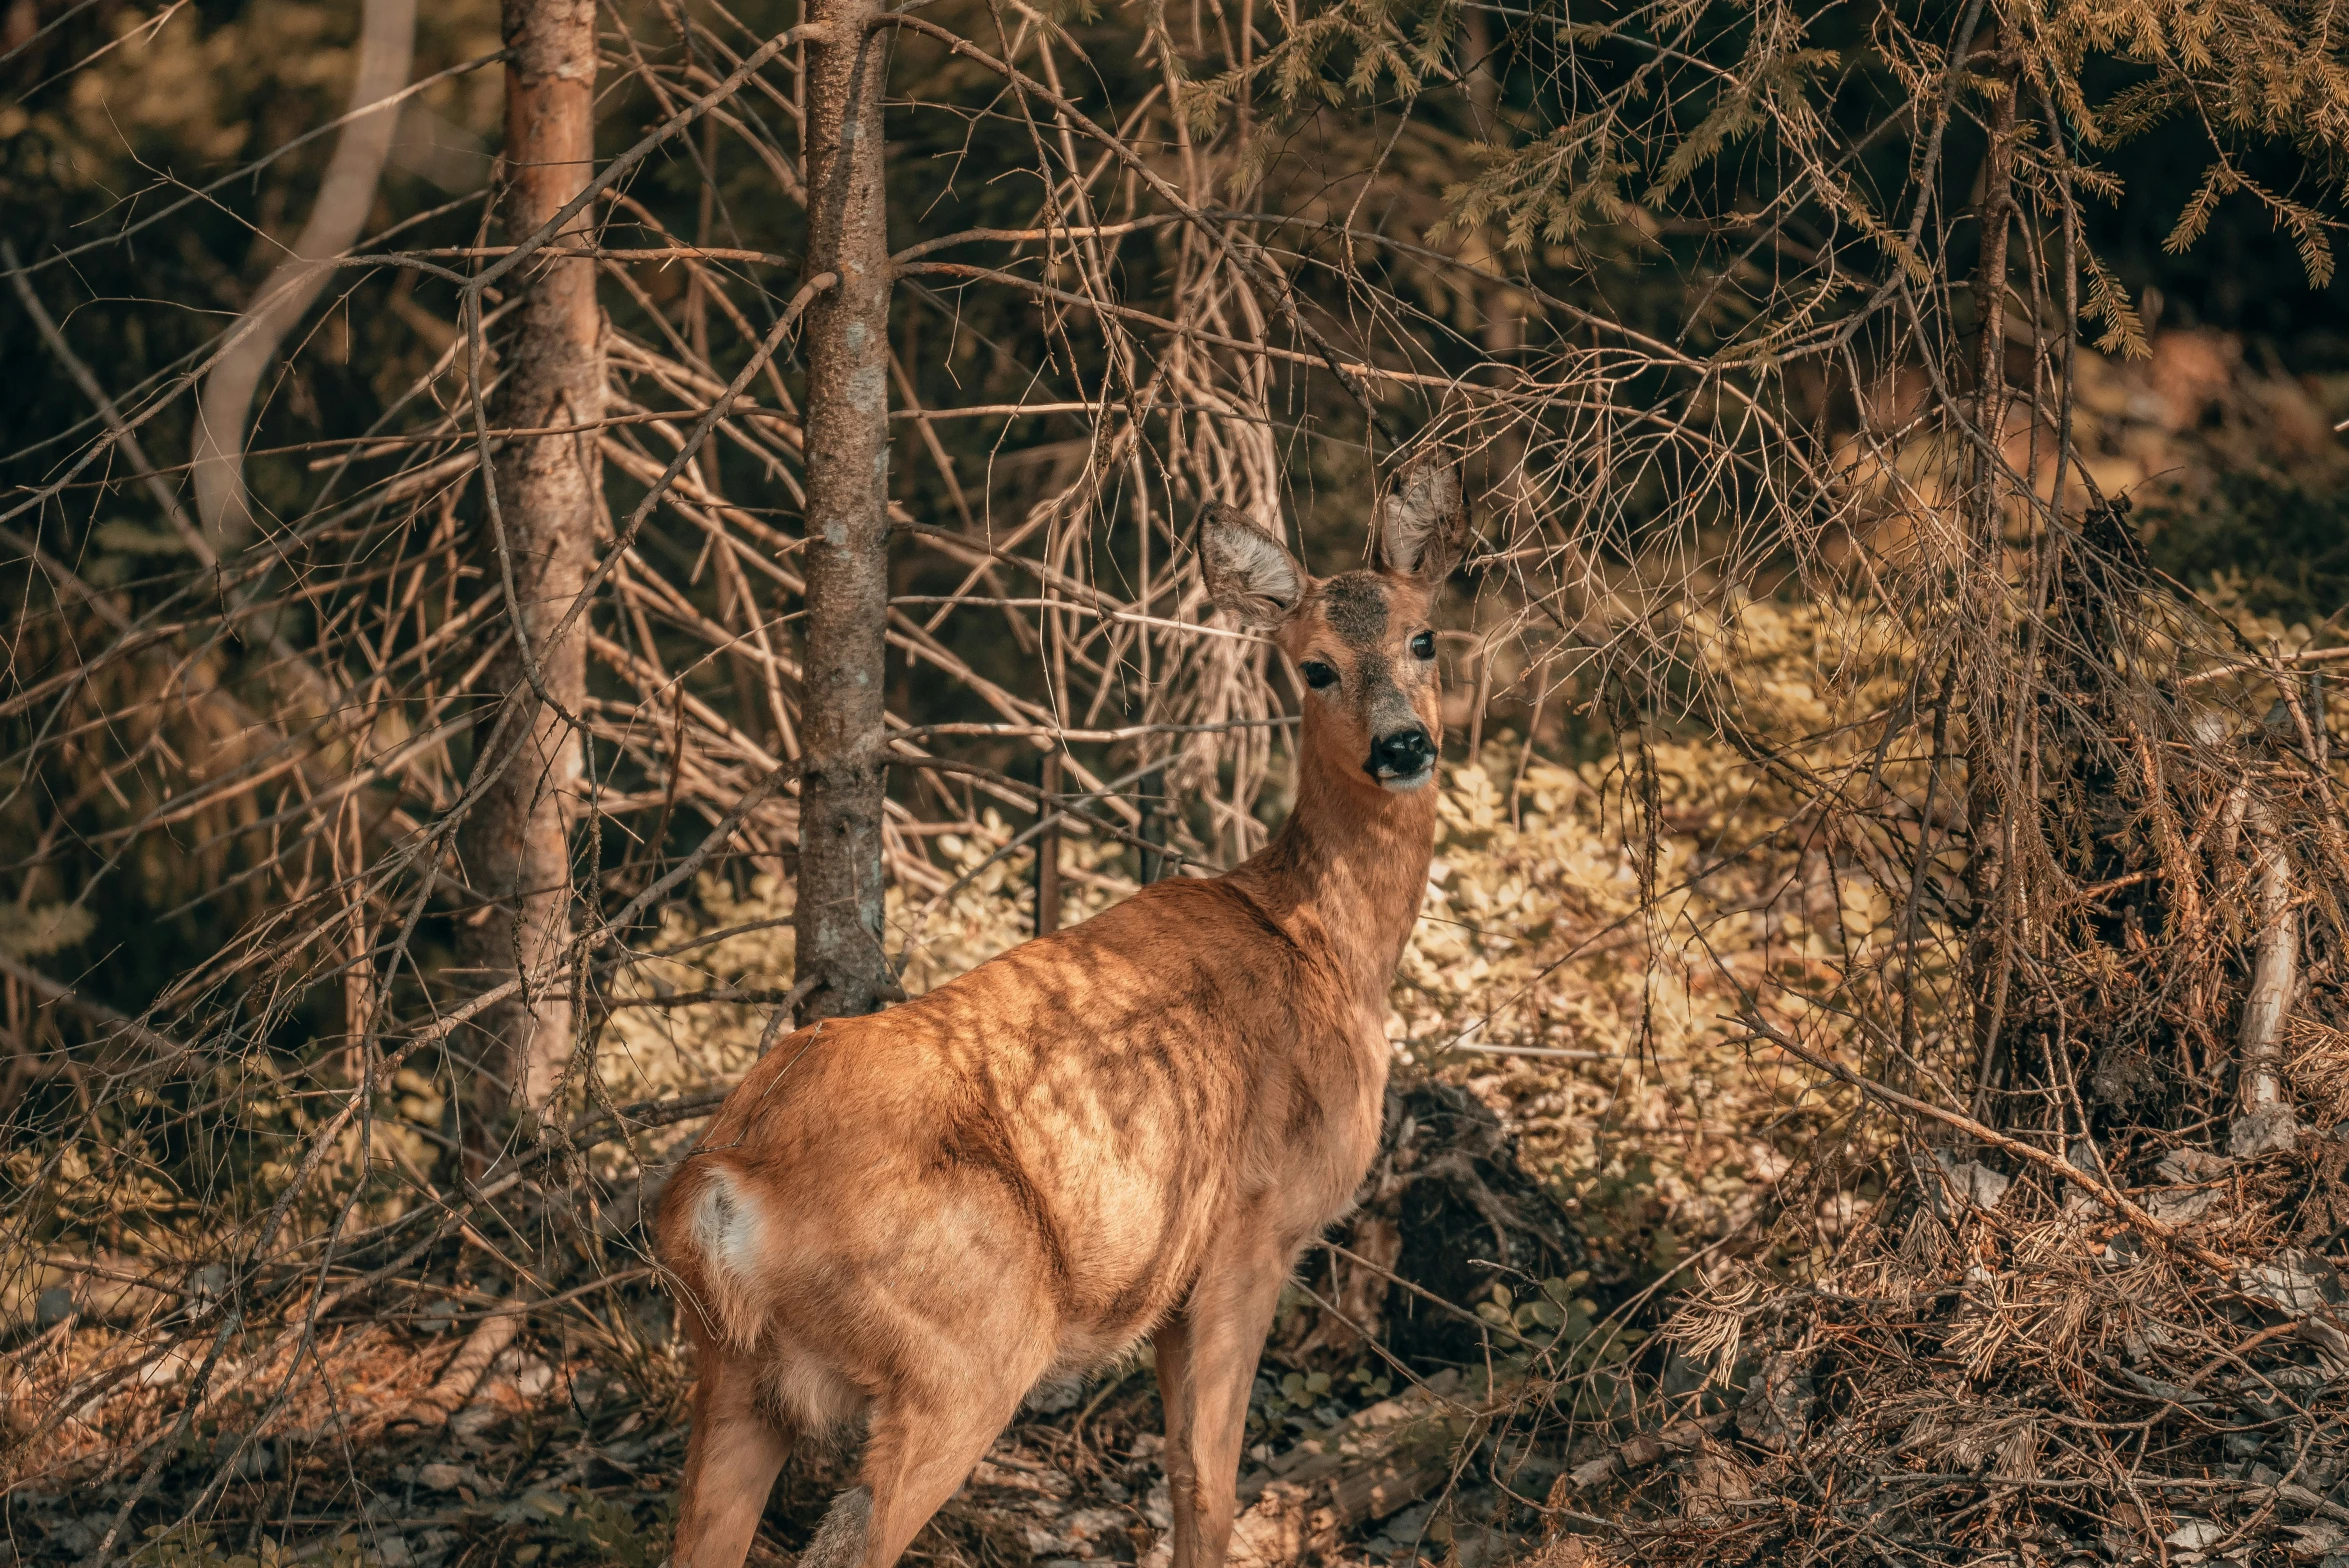 a small deer standing near some trees and rocks